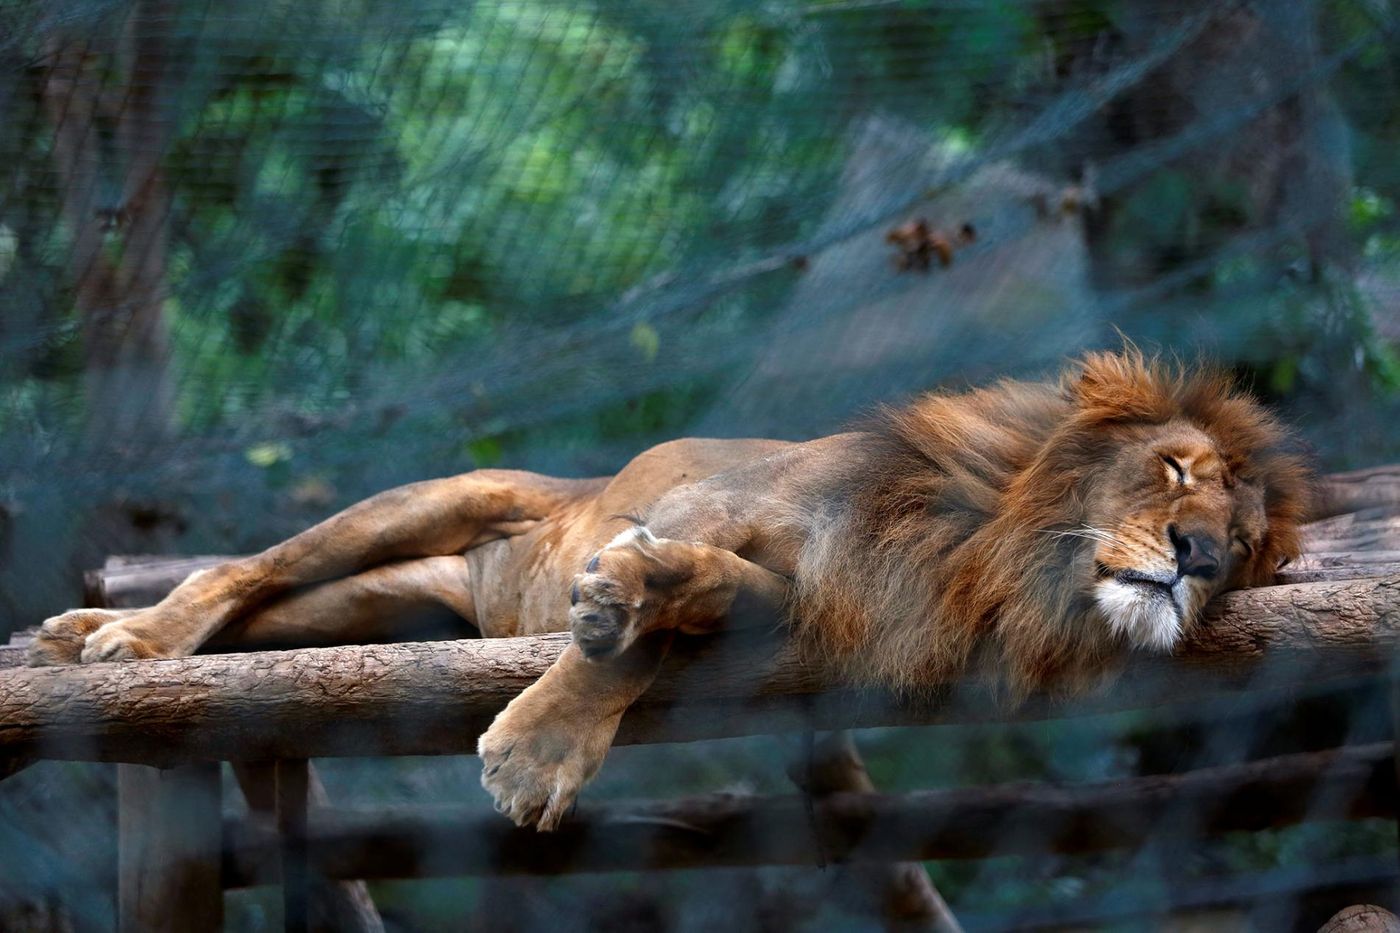 A malnourished lion sleeping in the zoo.